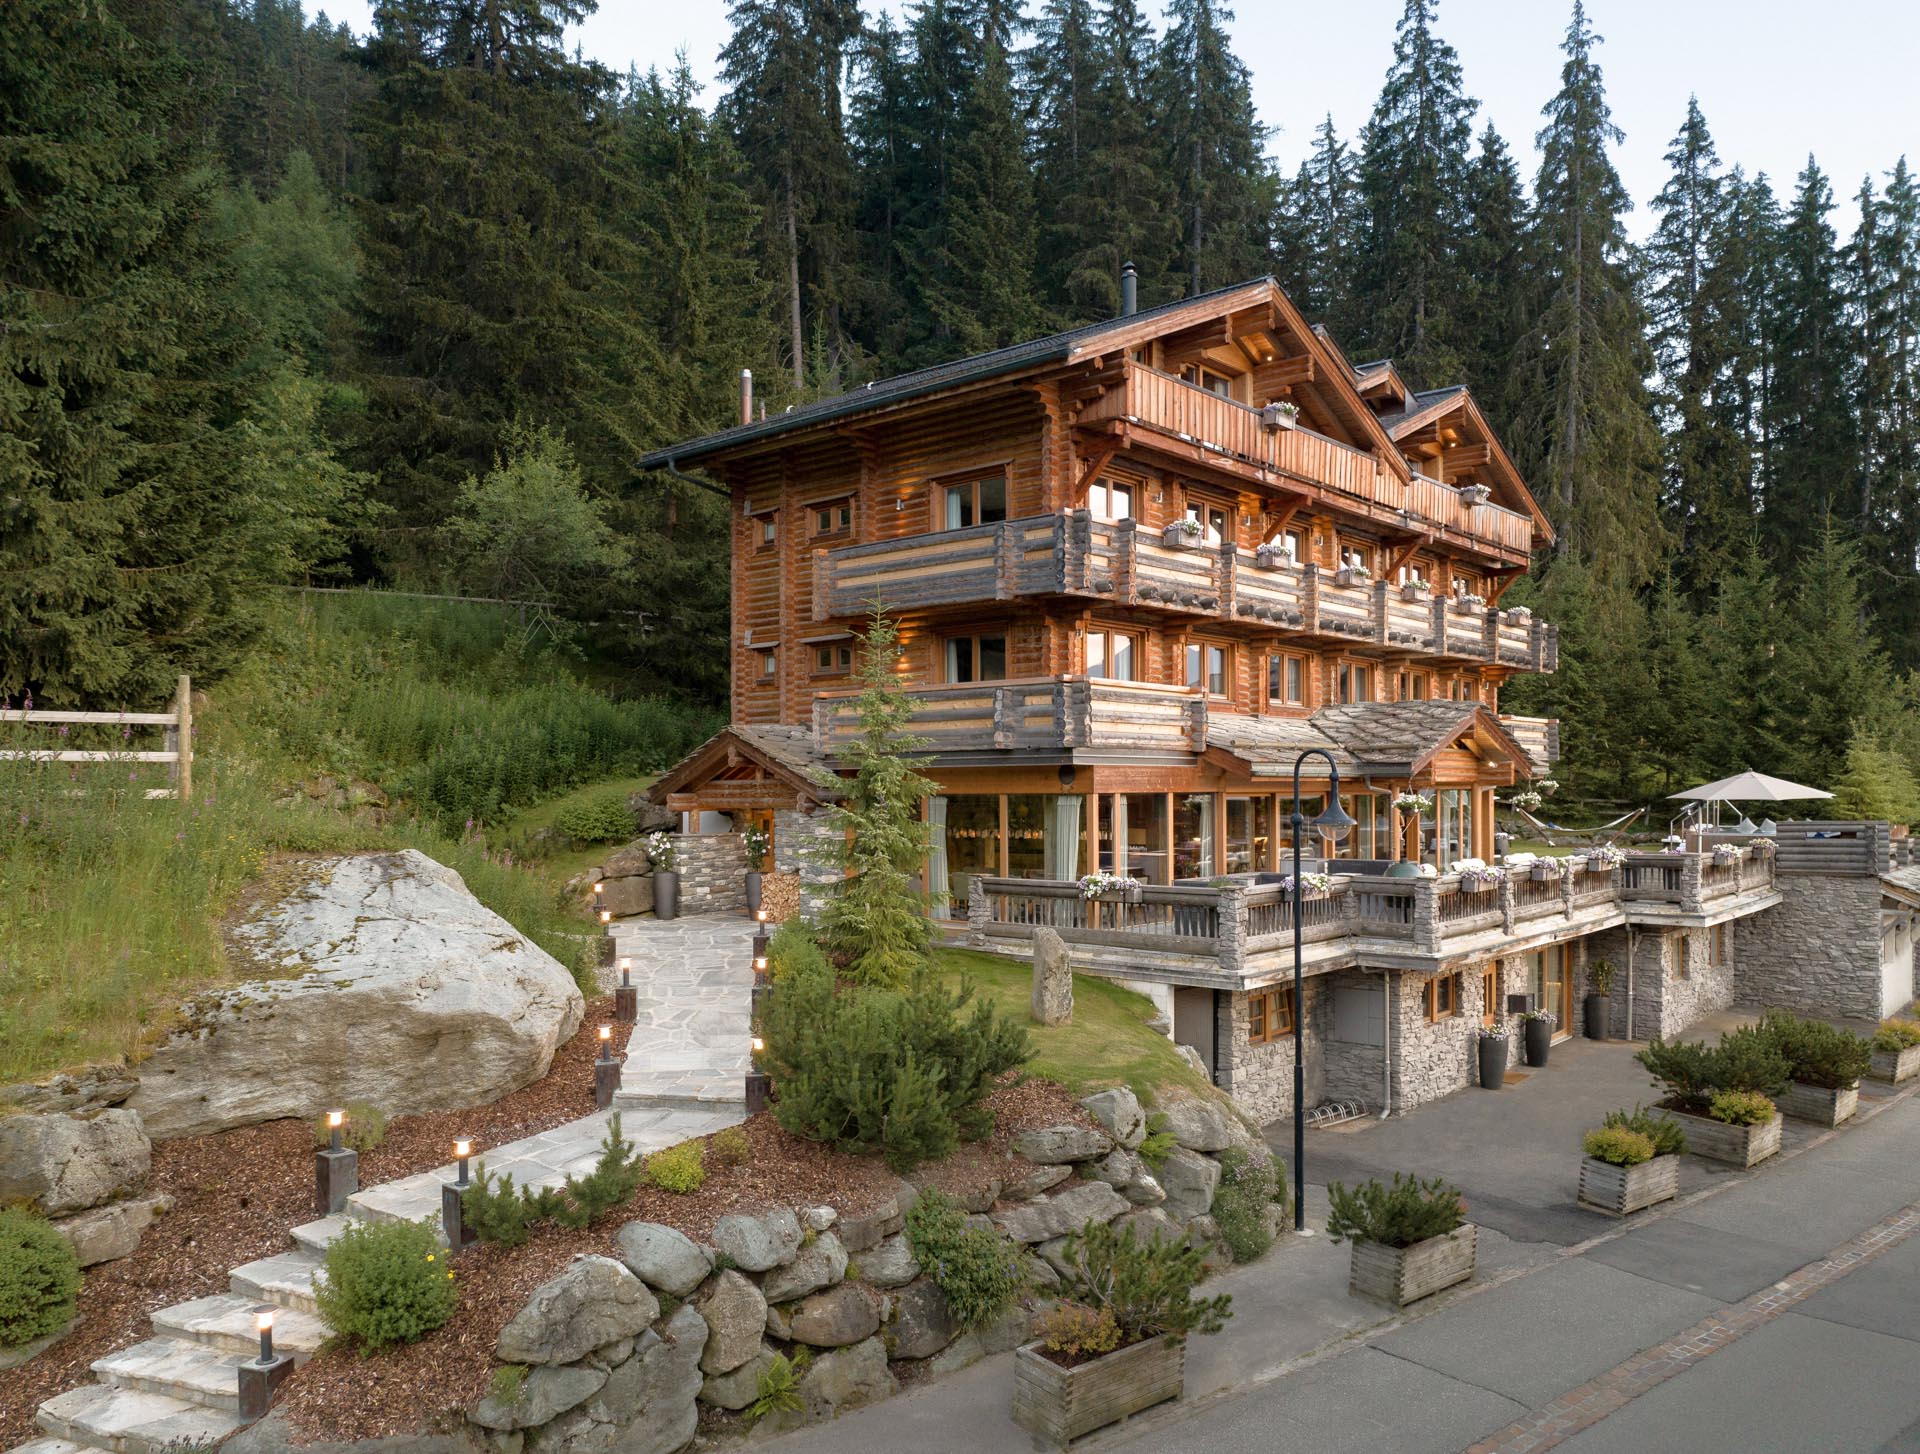 The Lodge exterior in summer